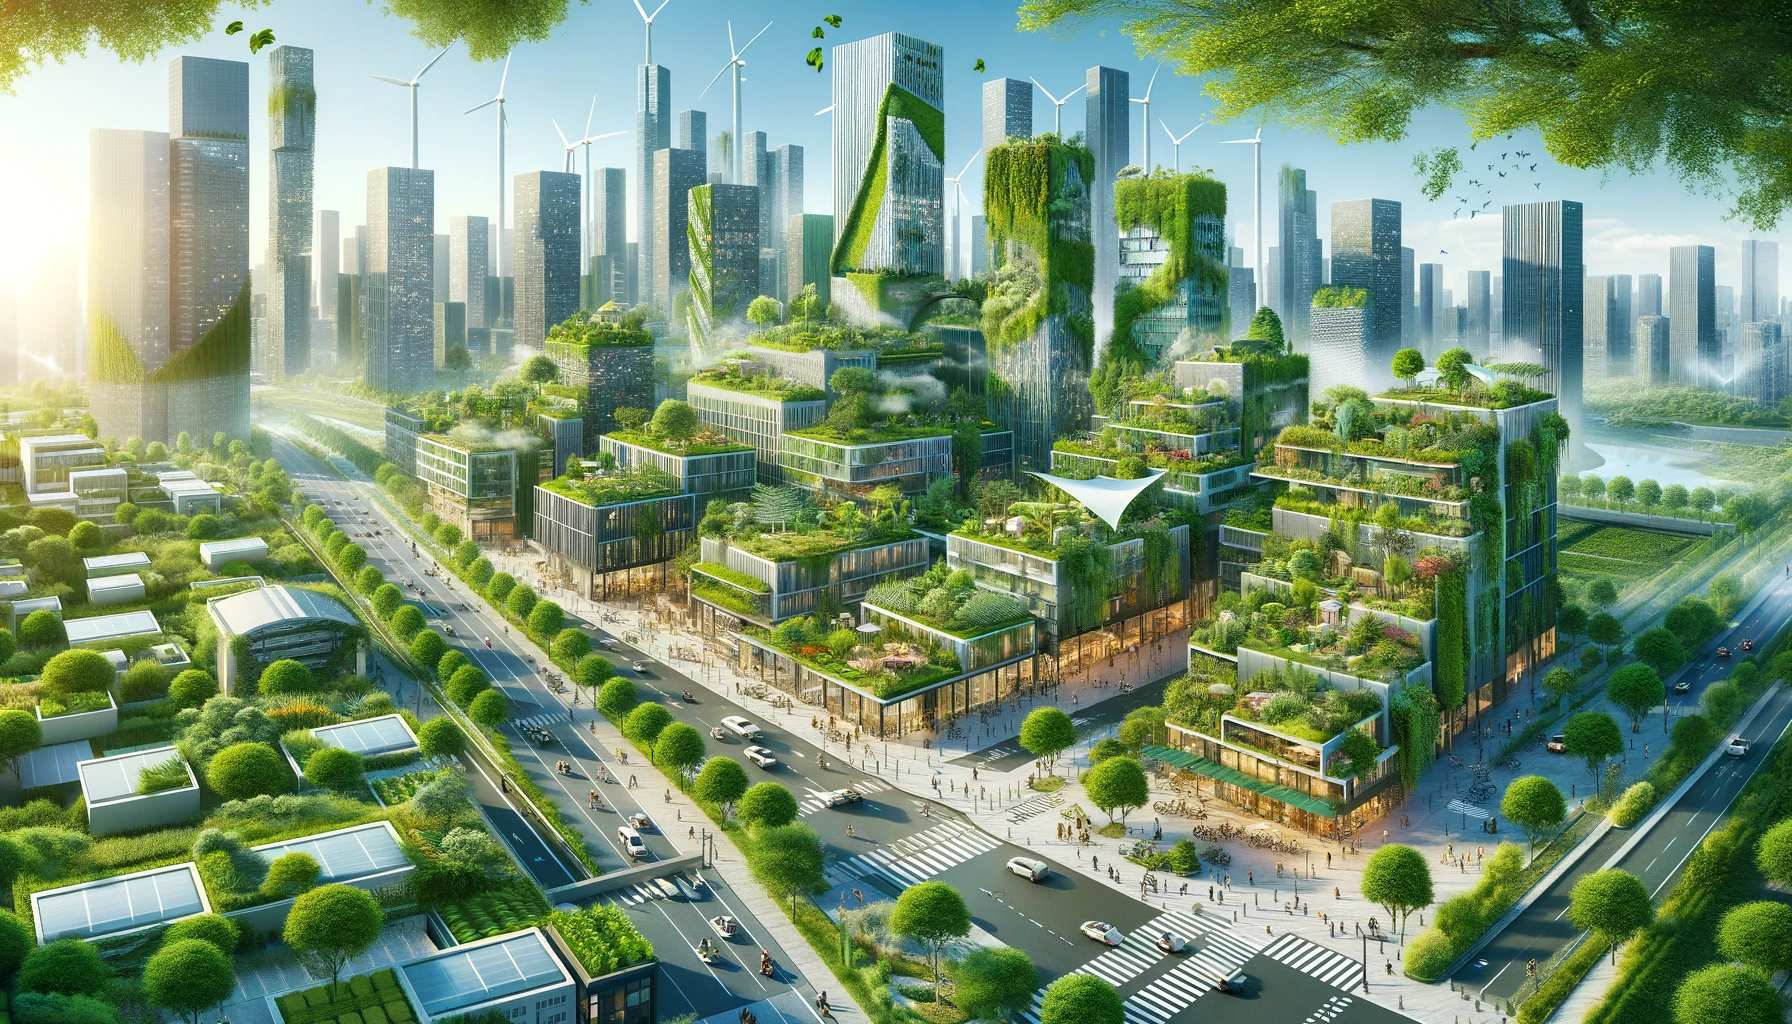 Green Cities: Urban Designs for a Sustainable Future